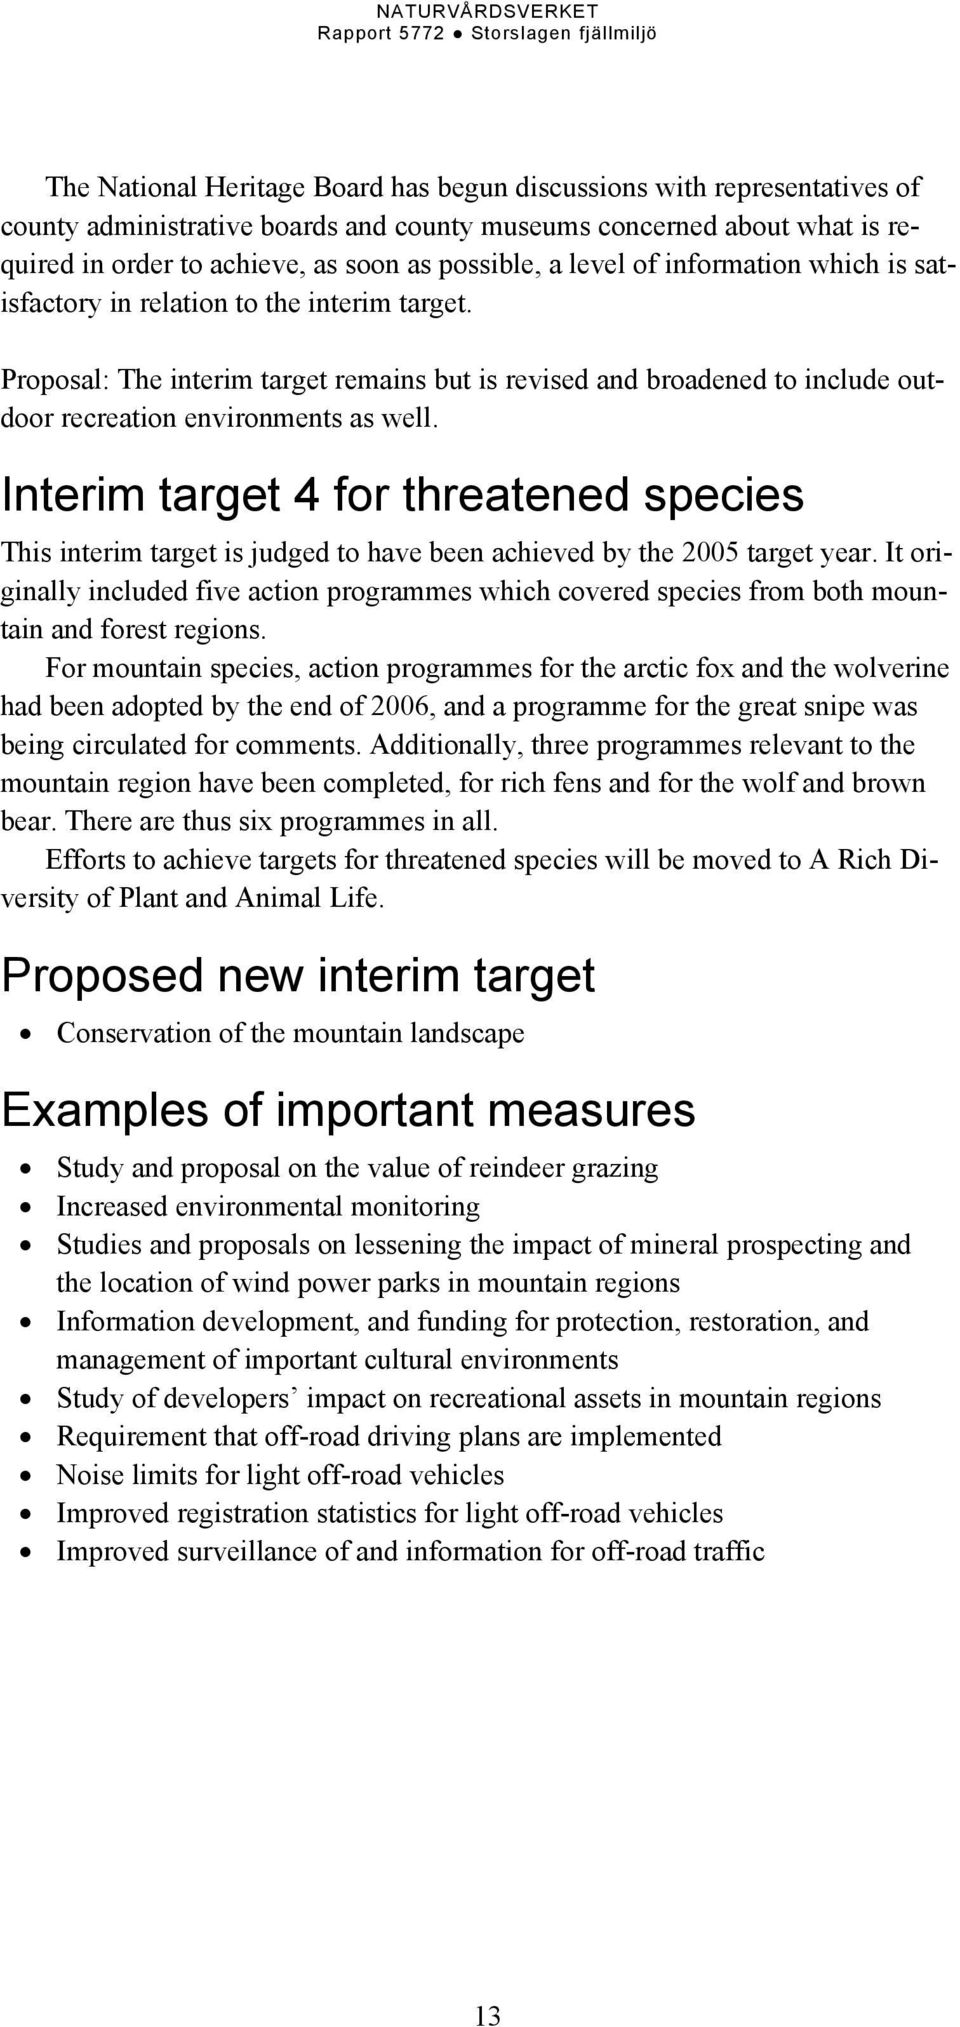 Interim target 4 for threatened species This interim target is judged to have been achieved by the 2005 target year.